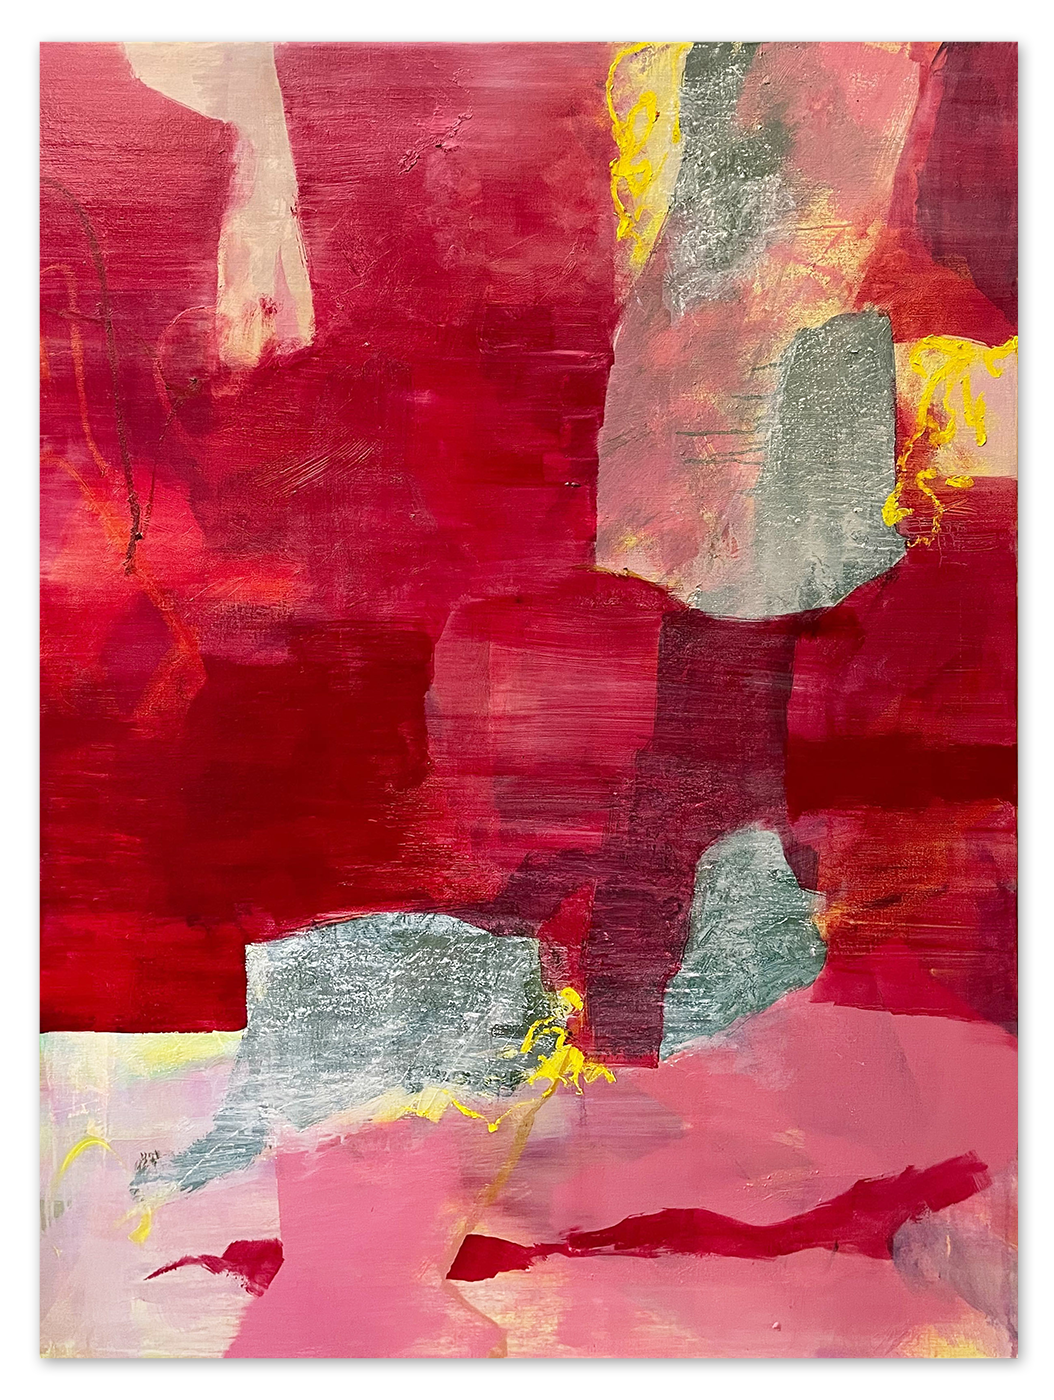 An abstract oil painting in yellow, pink and transparent reds